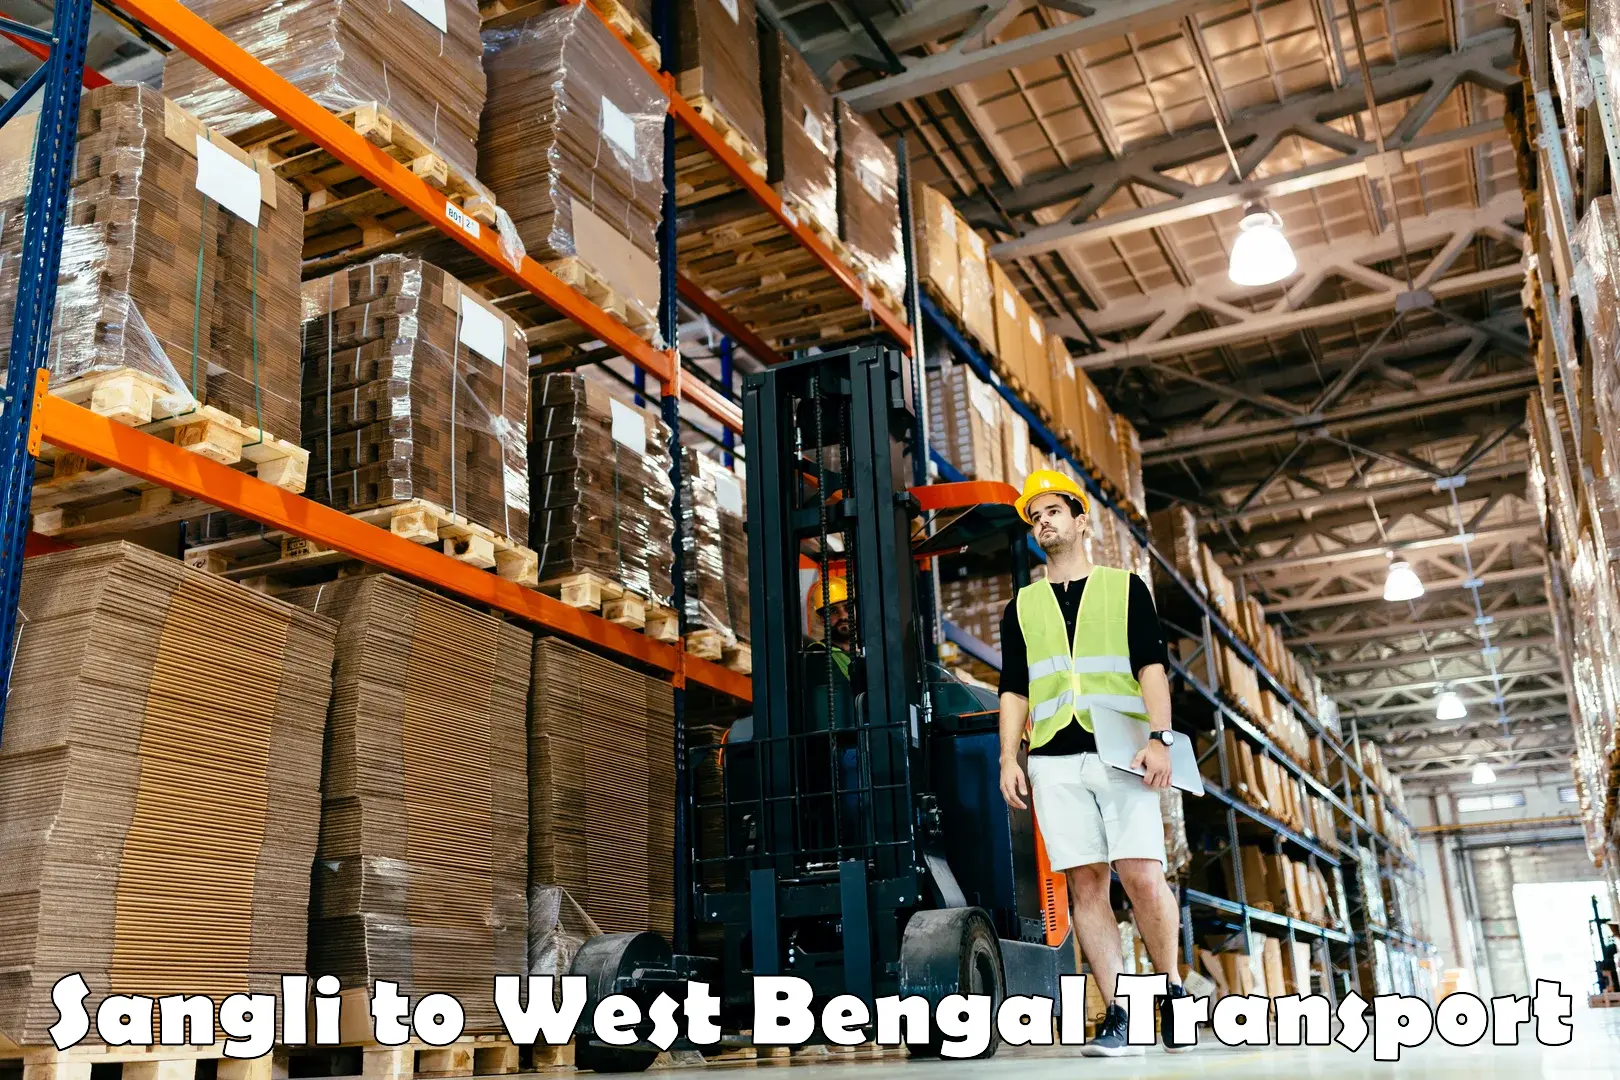 Shipping partner Sangli to West Bengal